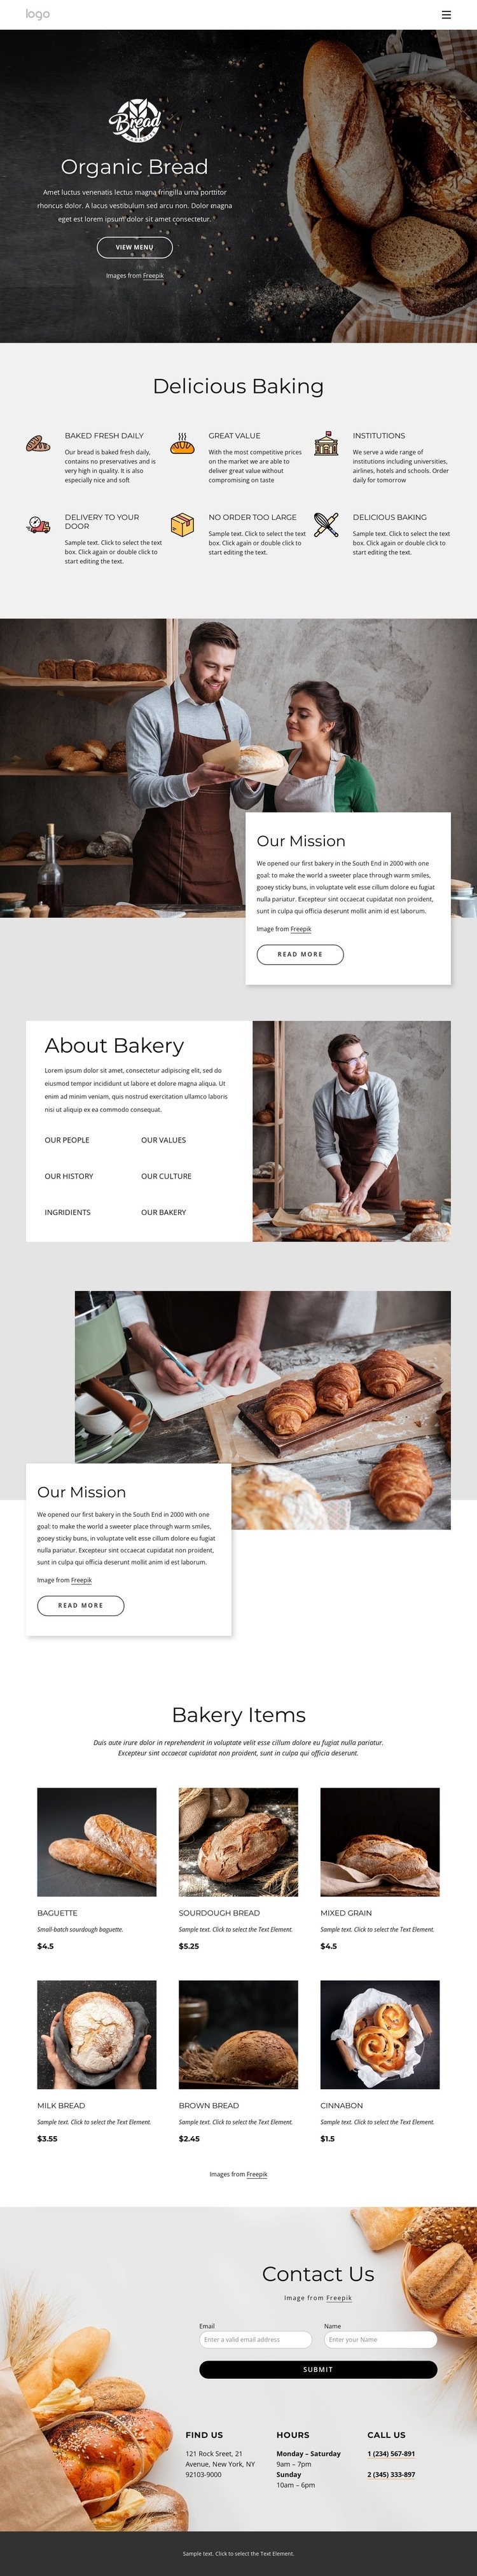 Bagels, buns, rolls, biscuits and loaf breads Web Page Design